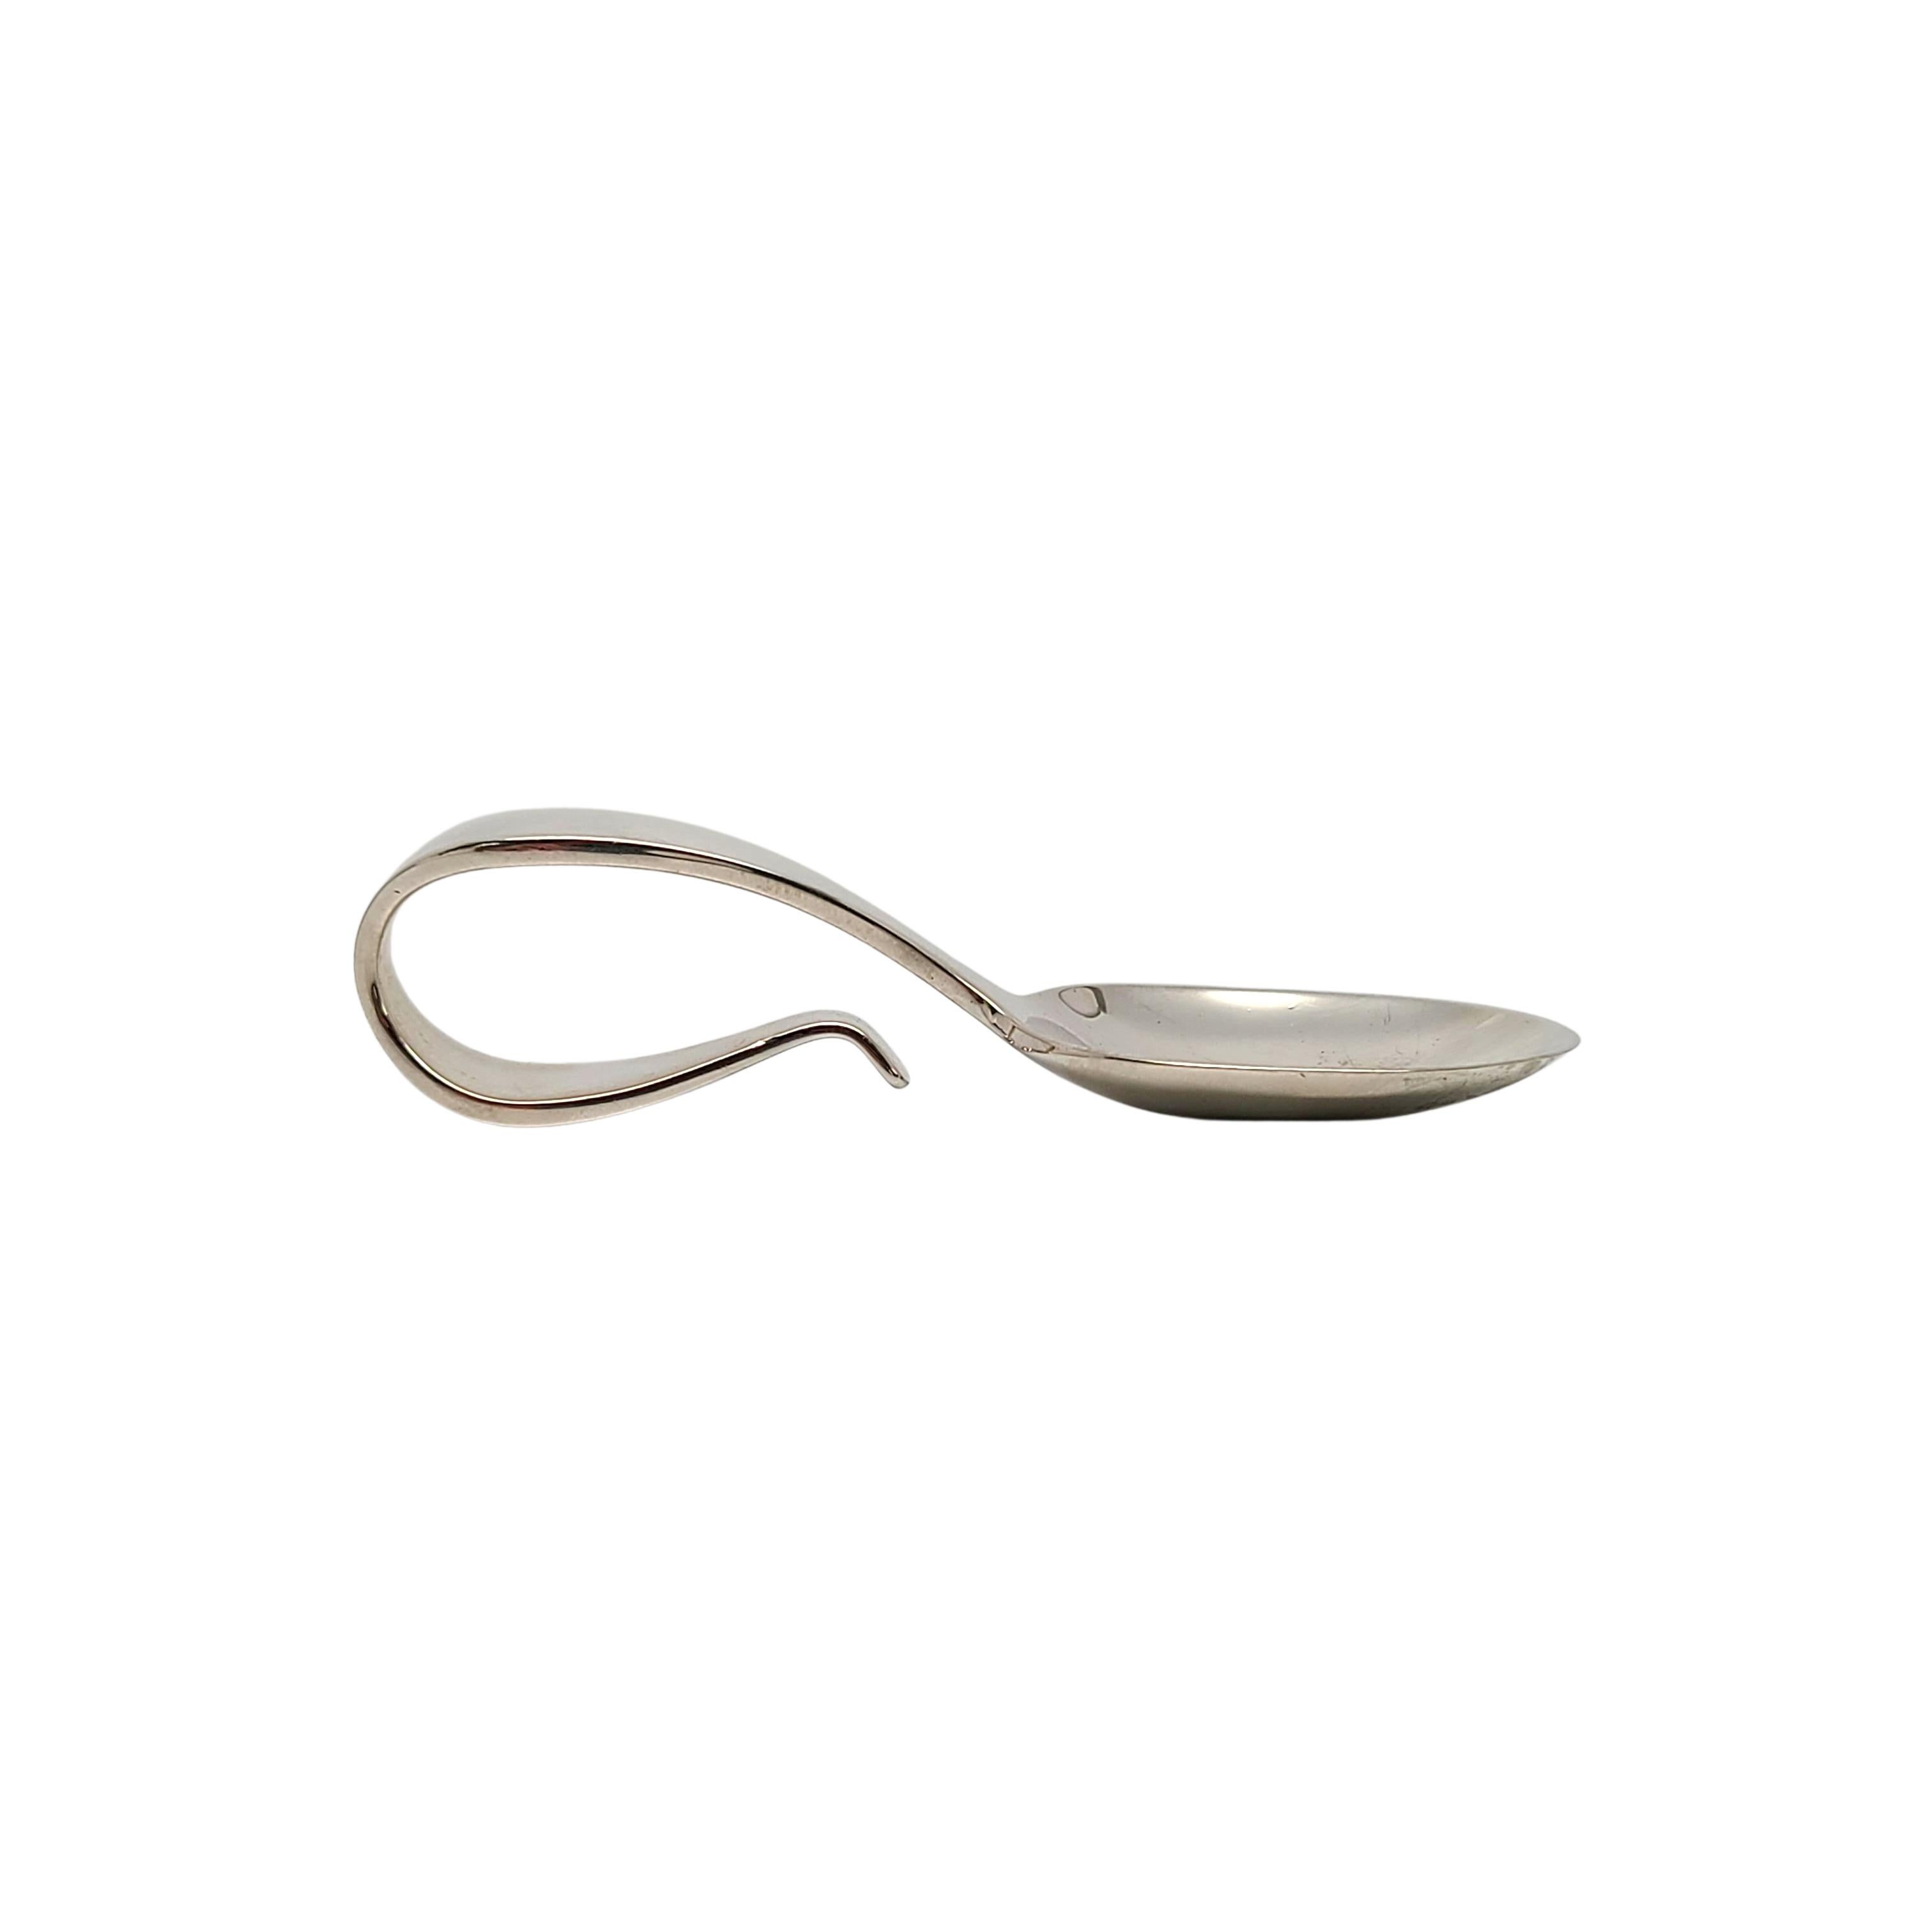 tiffany silver spoon for baby